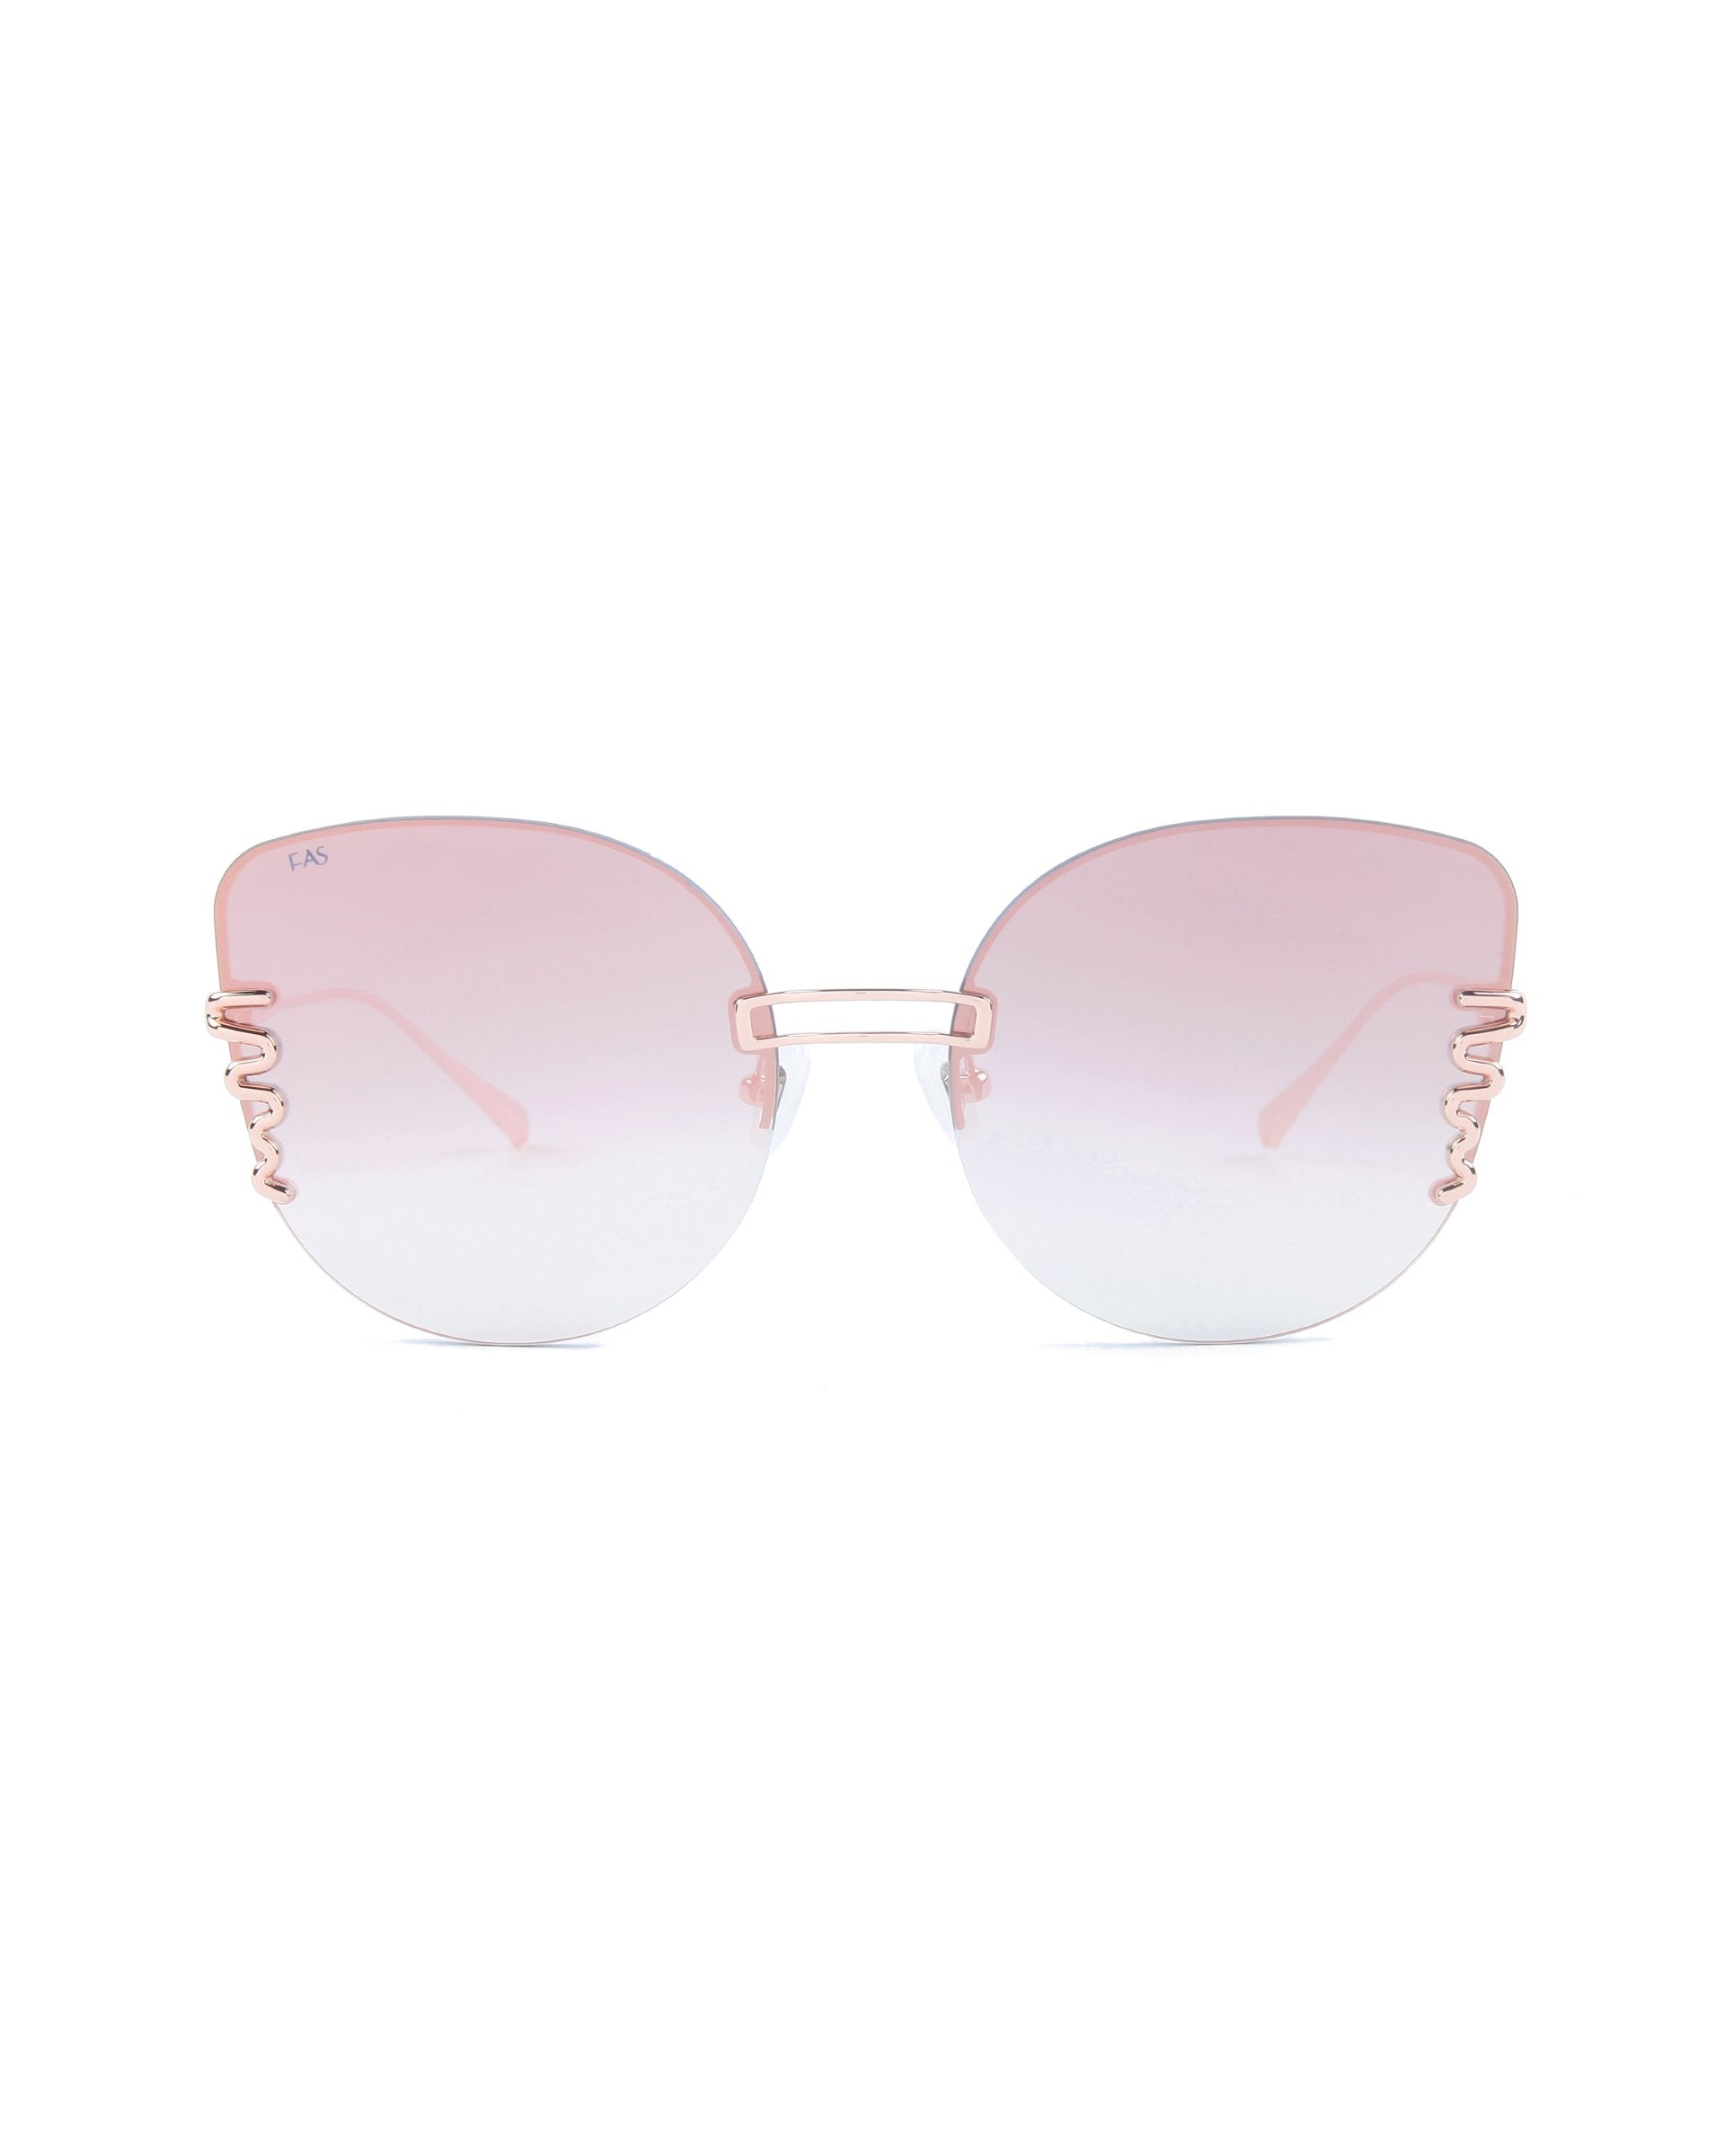 A pair of stylish oversized cat-eye sunglasses with large, round lenses featuring a gradient from pink at the top to translucent at the bottom. The frameless design includes a gold double bridge, delicate gold accents at the temples, and adjustable nosepads for a perfect fit: Girlboss by For Art&#39;s Sake®.